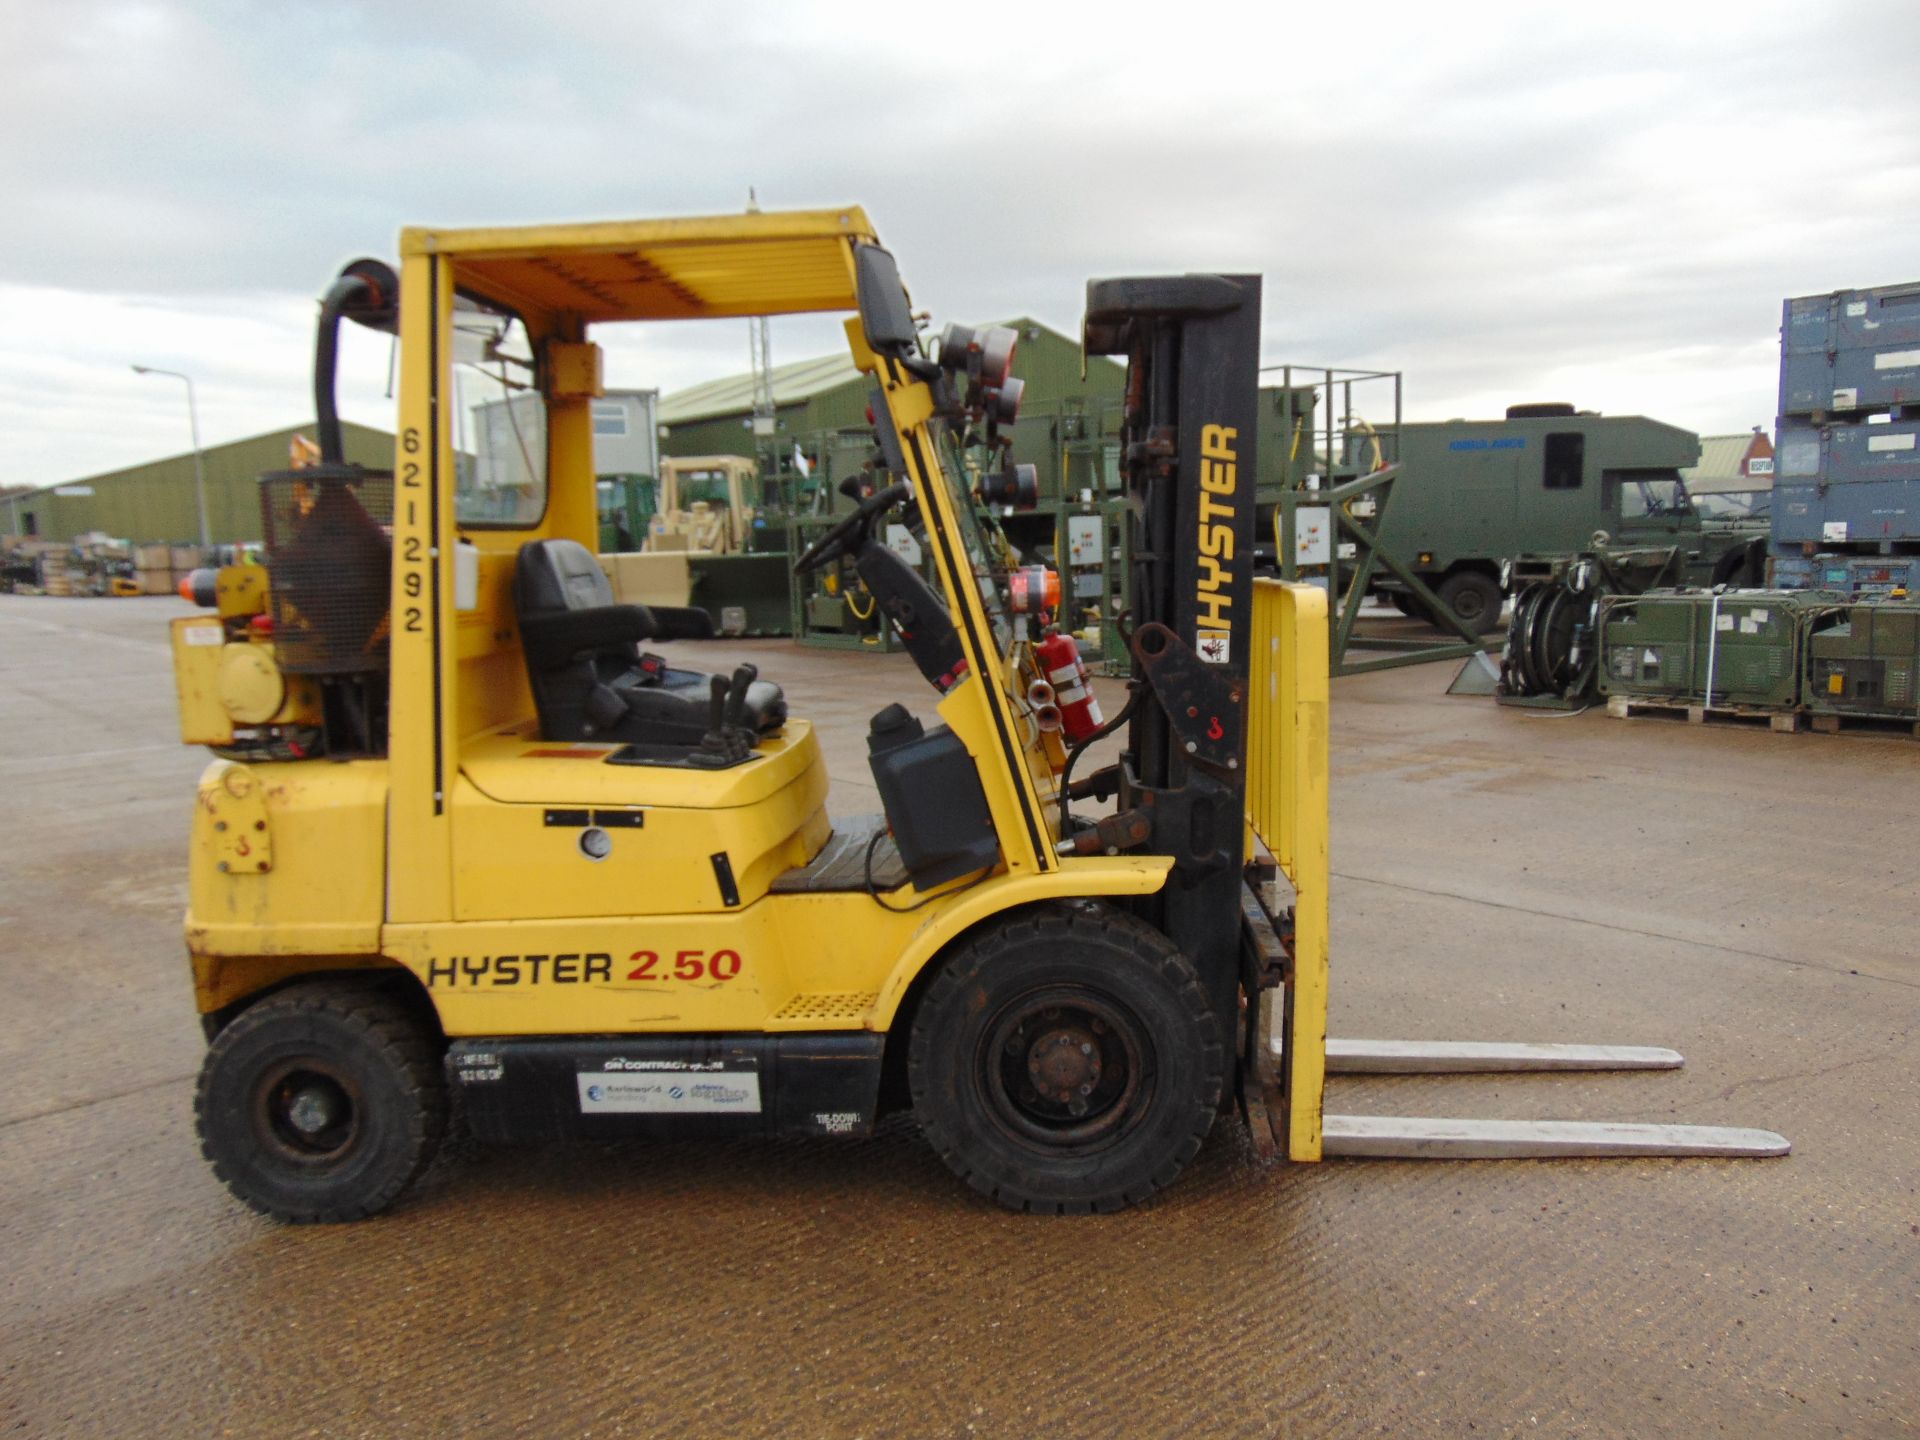 Hyster 2.50 Class C, Zone 2 Protected Diesel Forklift - Image 5 of 23